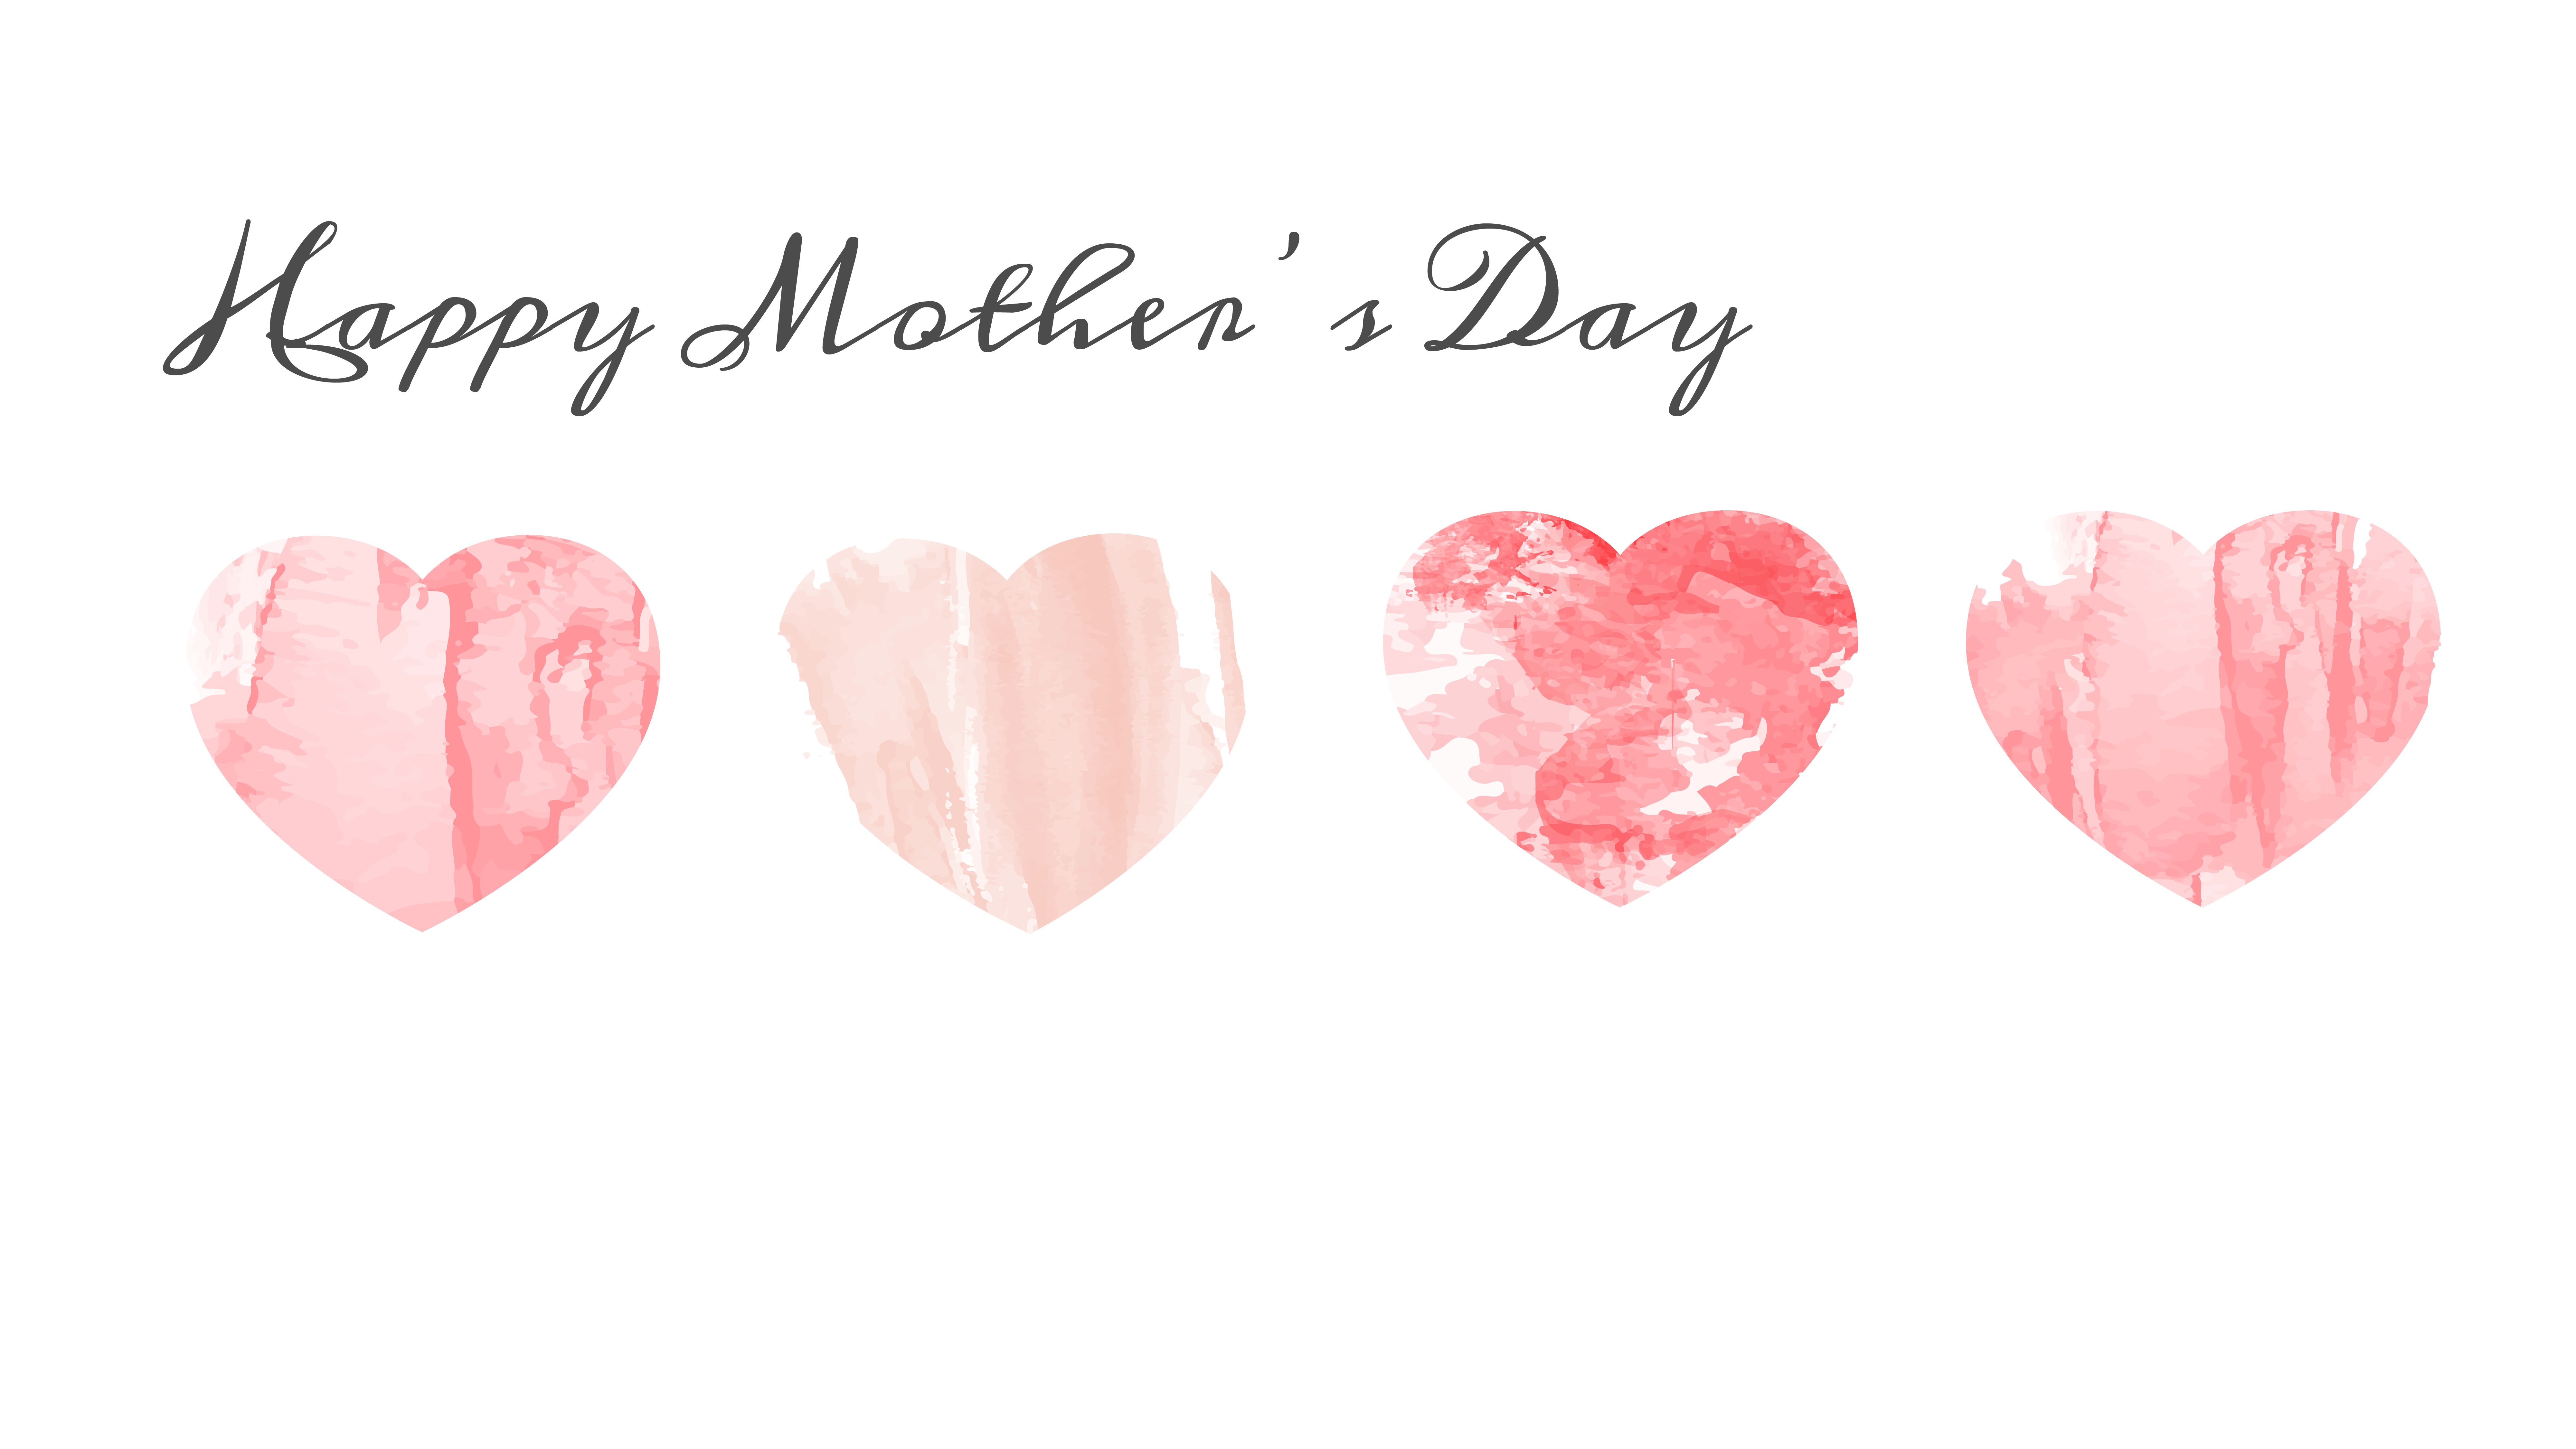 Custom Zoom Background for a Virtual Mother's Day Celebration Photo Blog